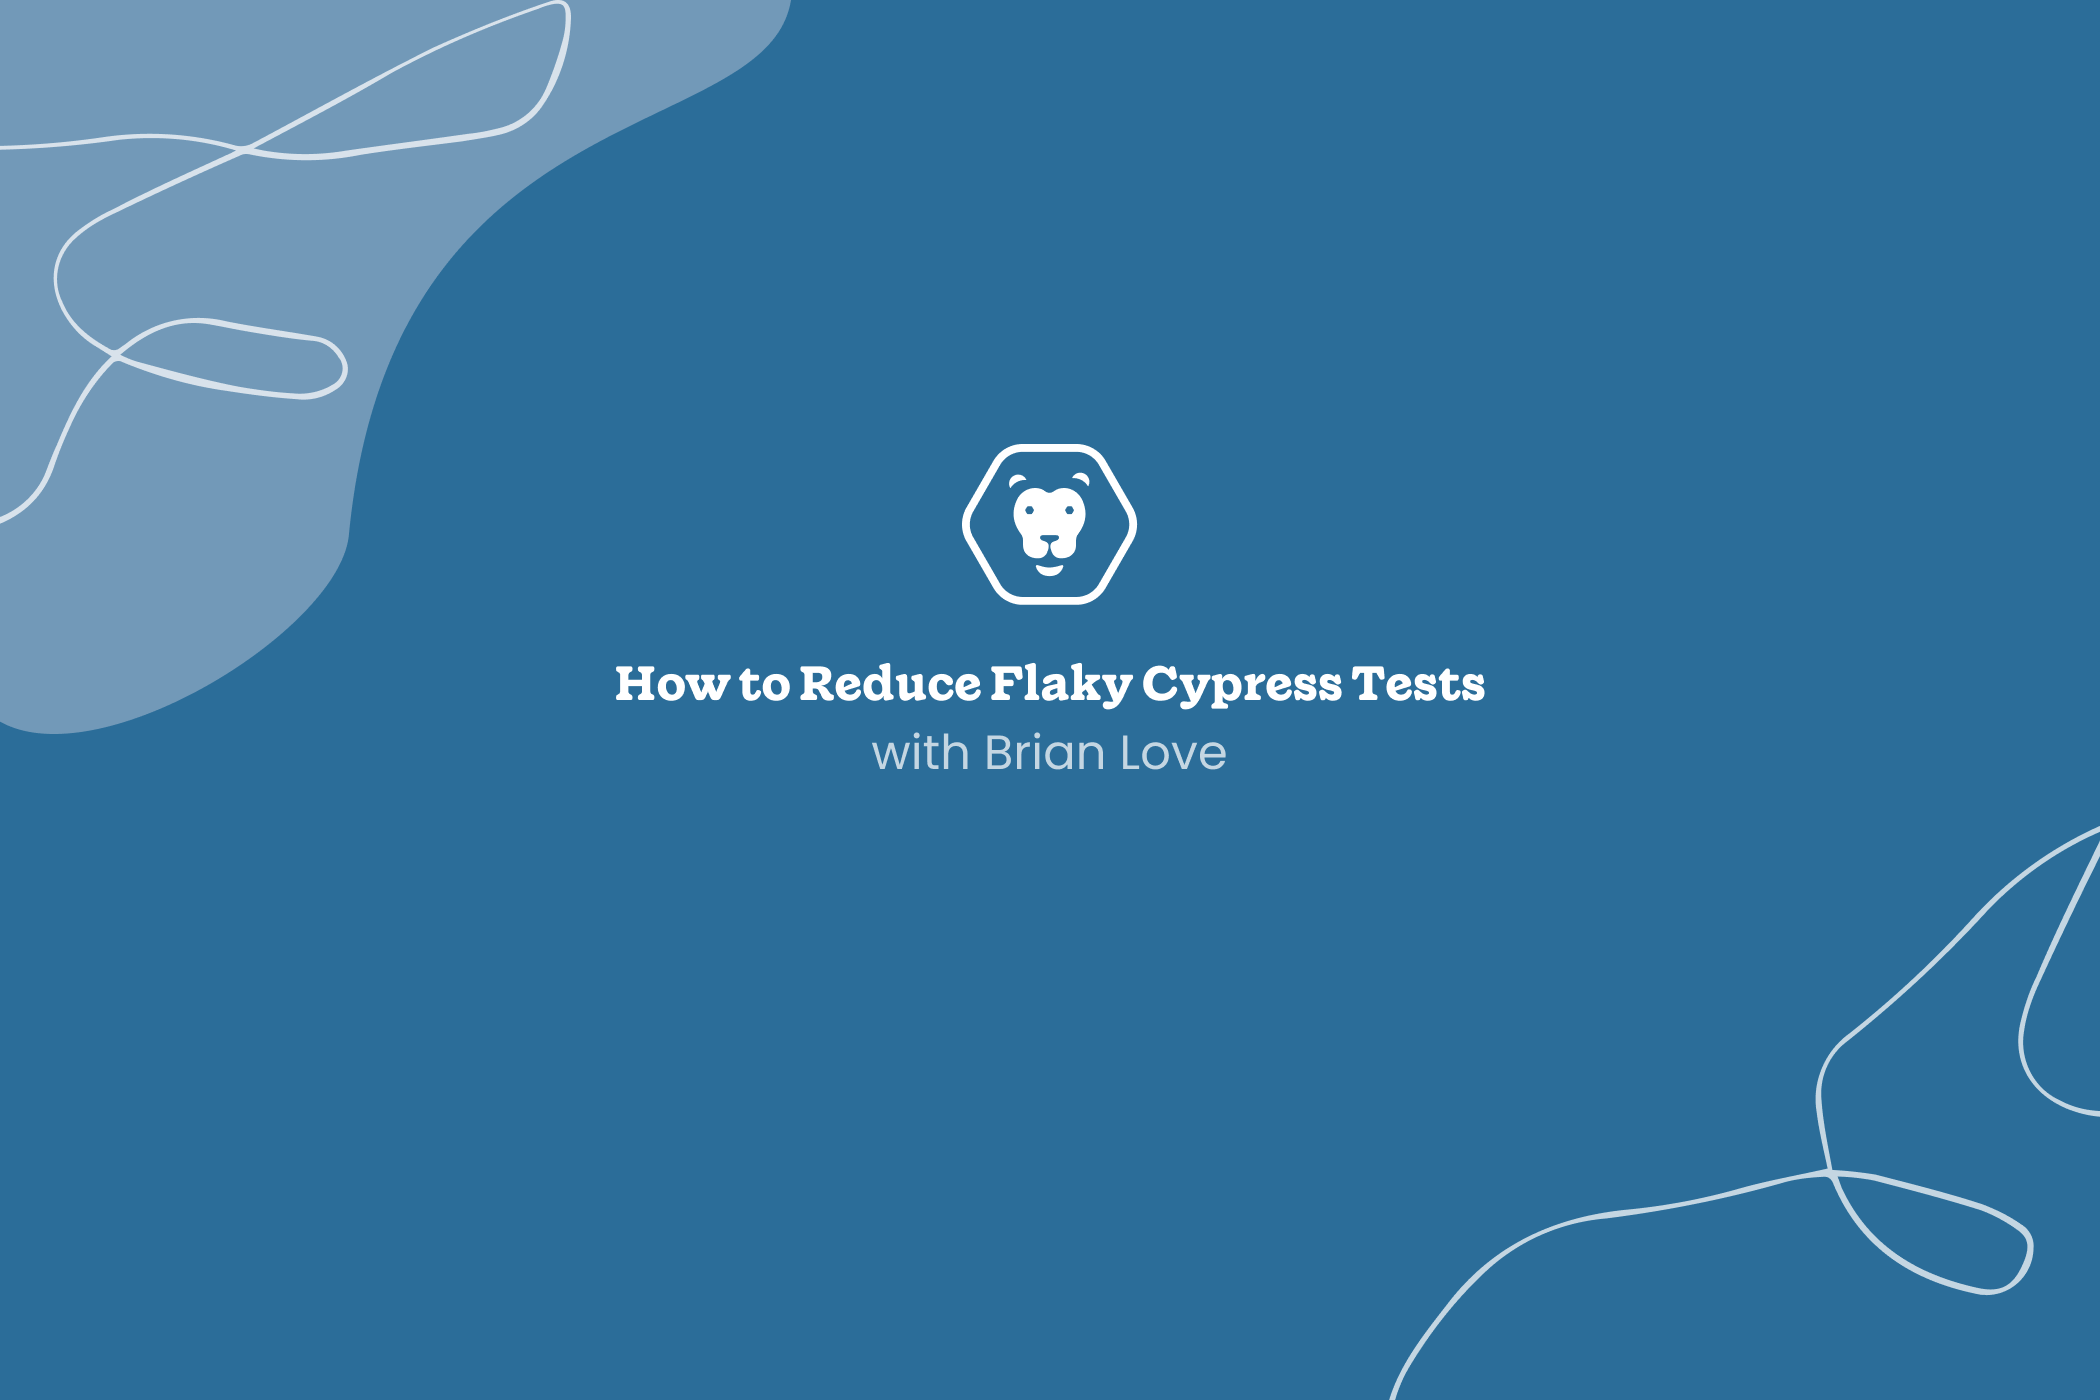 How to Reduce Flaky Cypress Tests